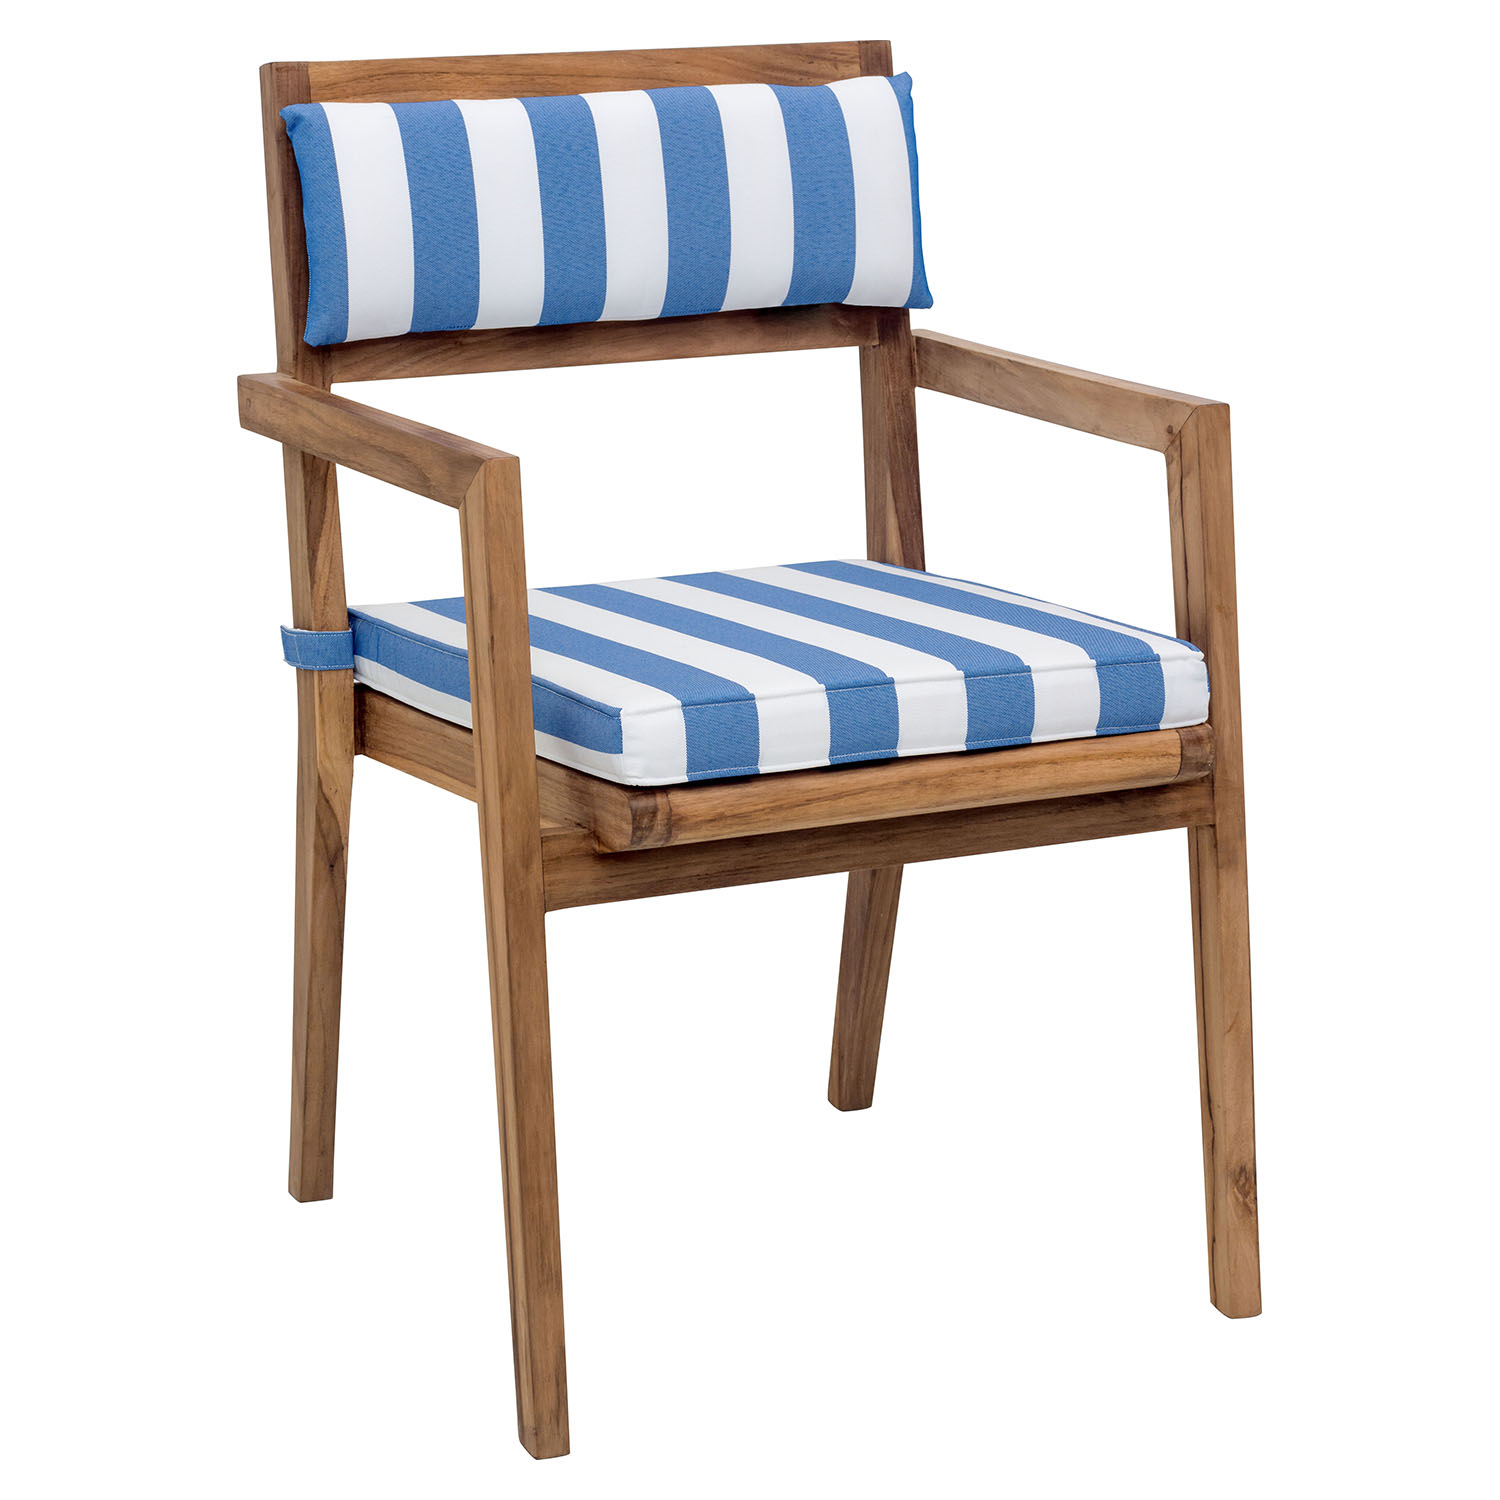 Nautical Chair Back Cushion Blue and White DCG Stores